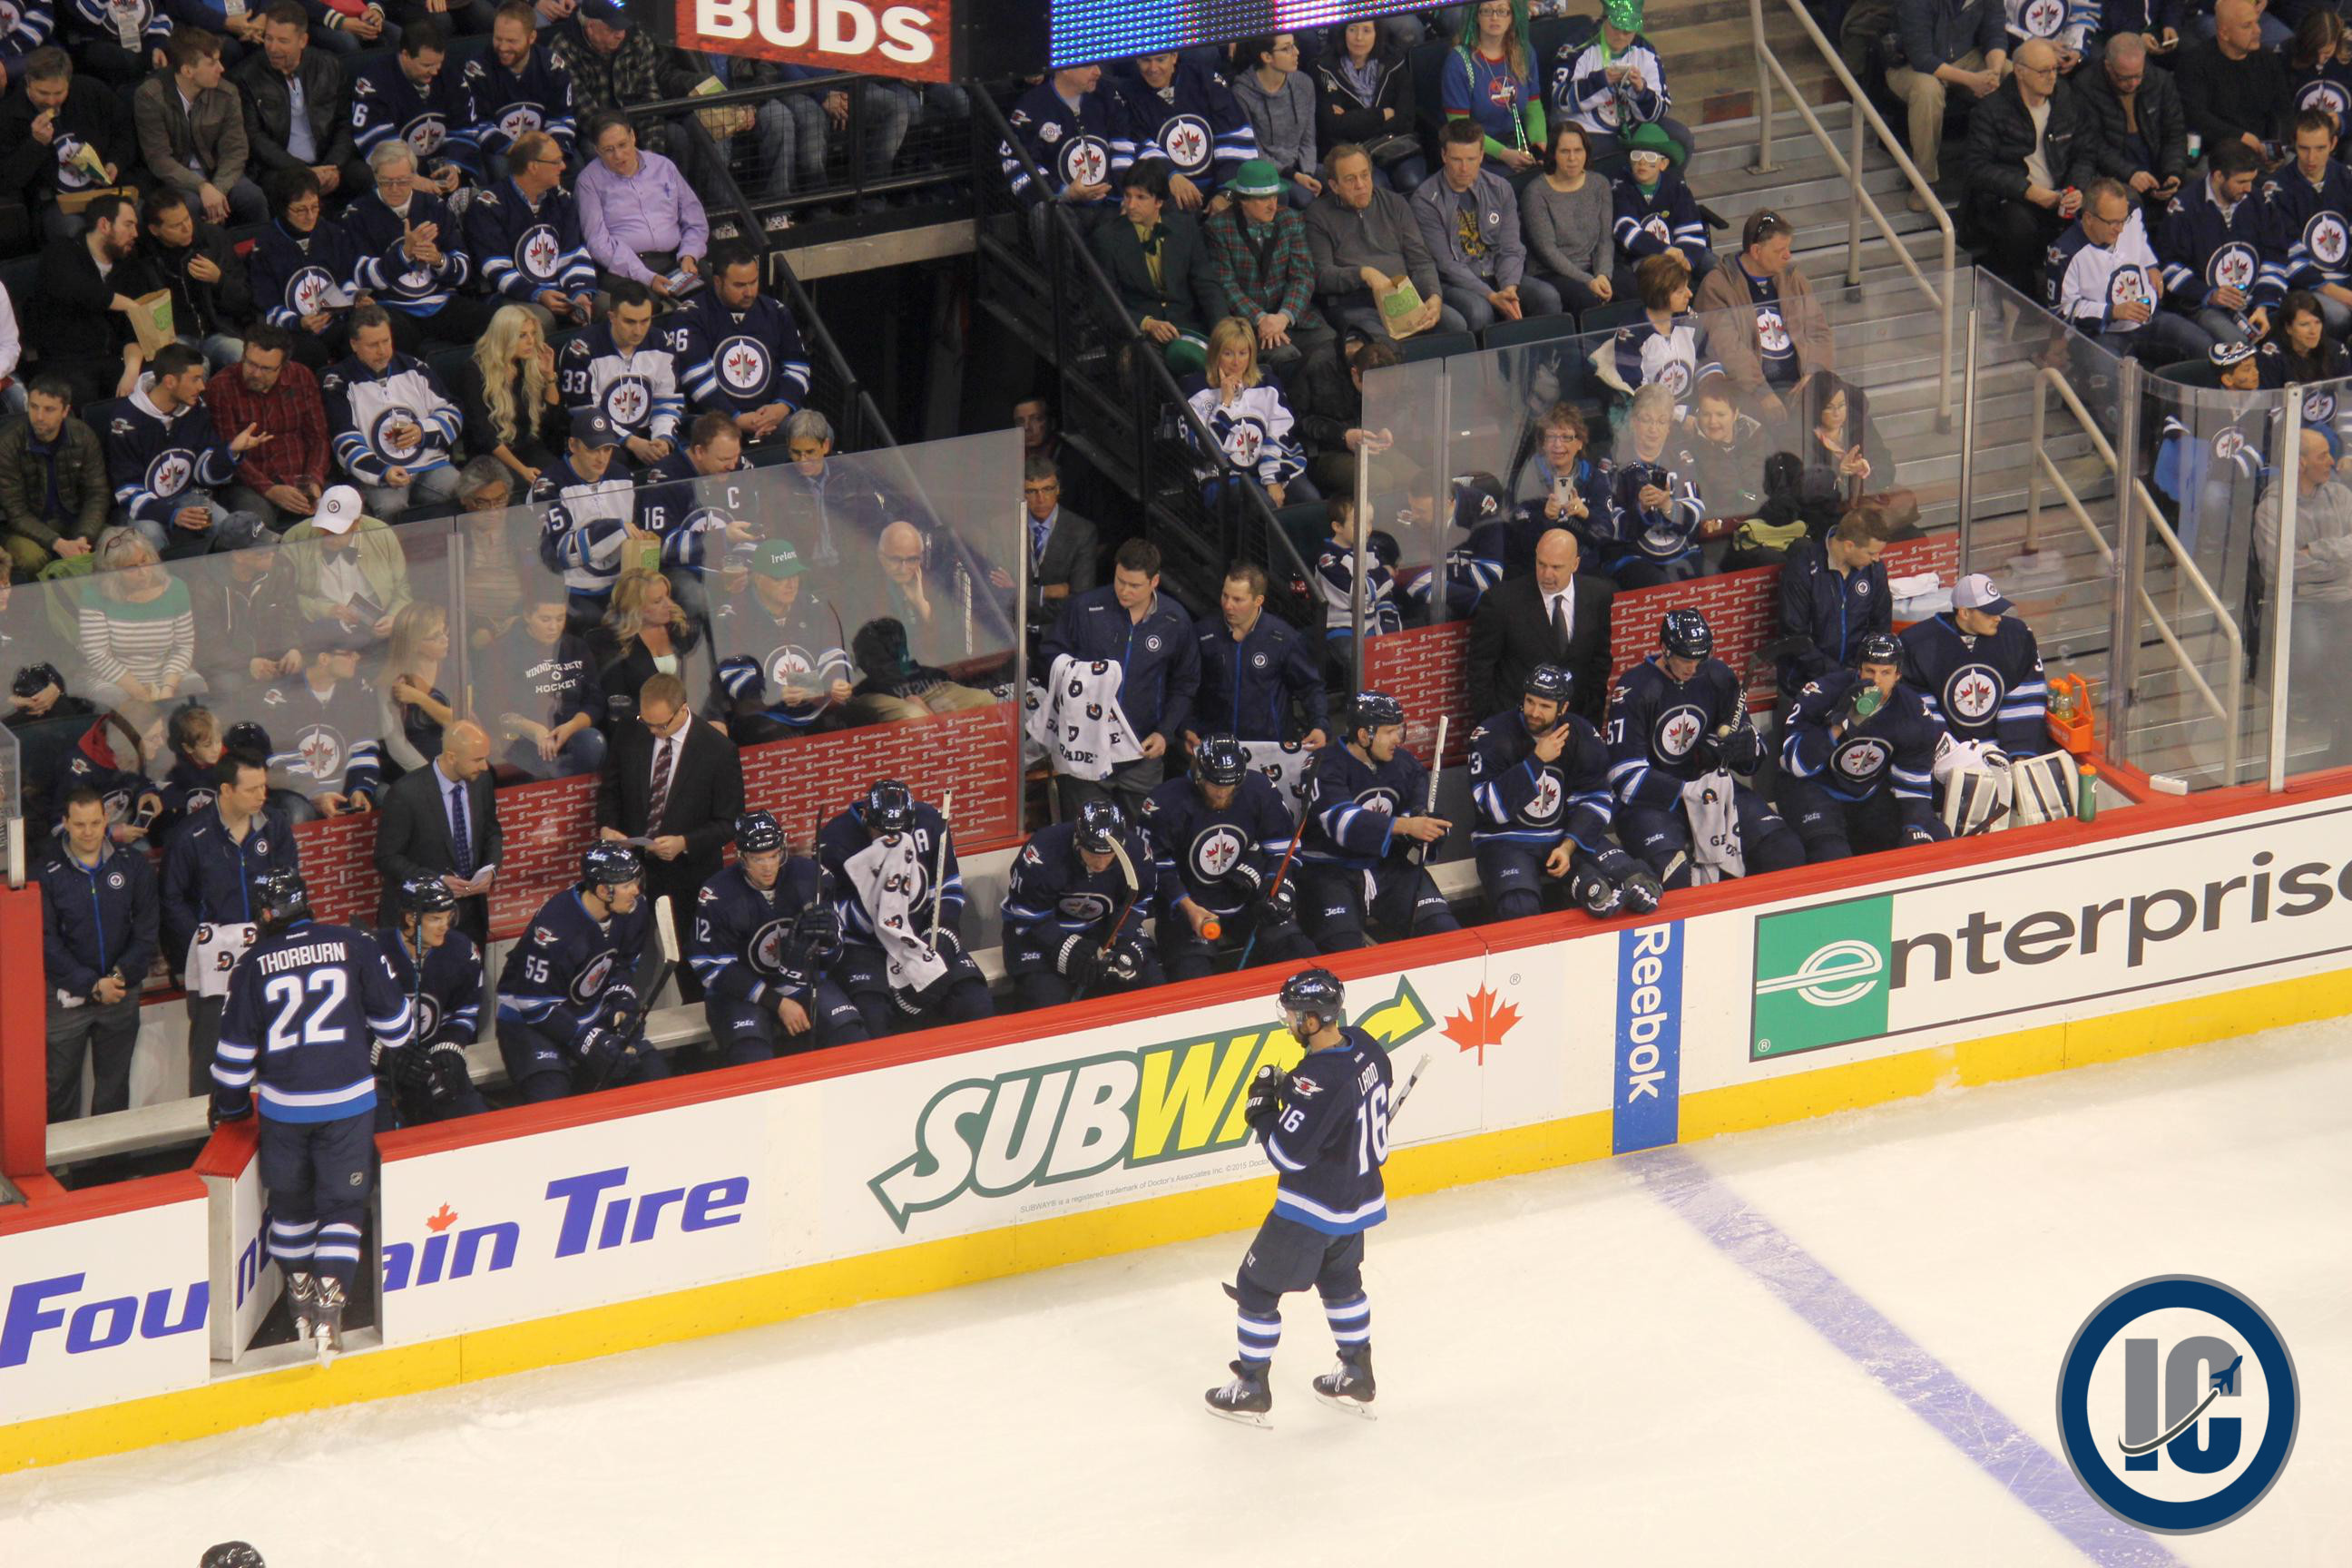 Jets bench March 17